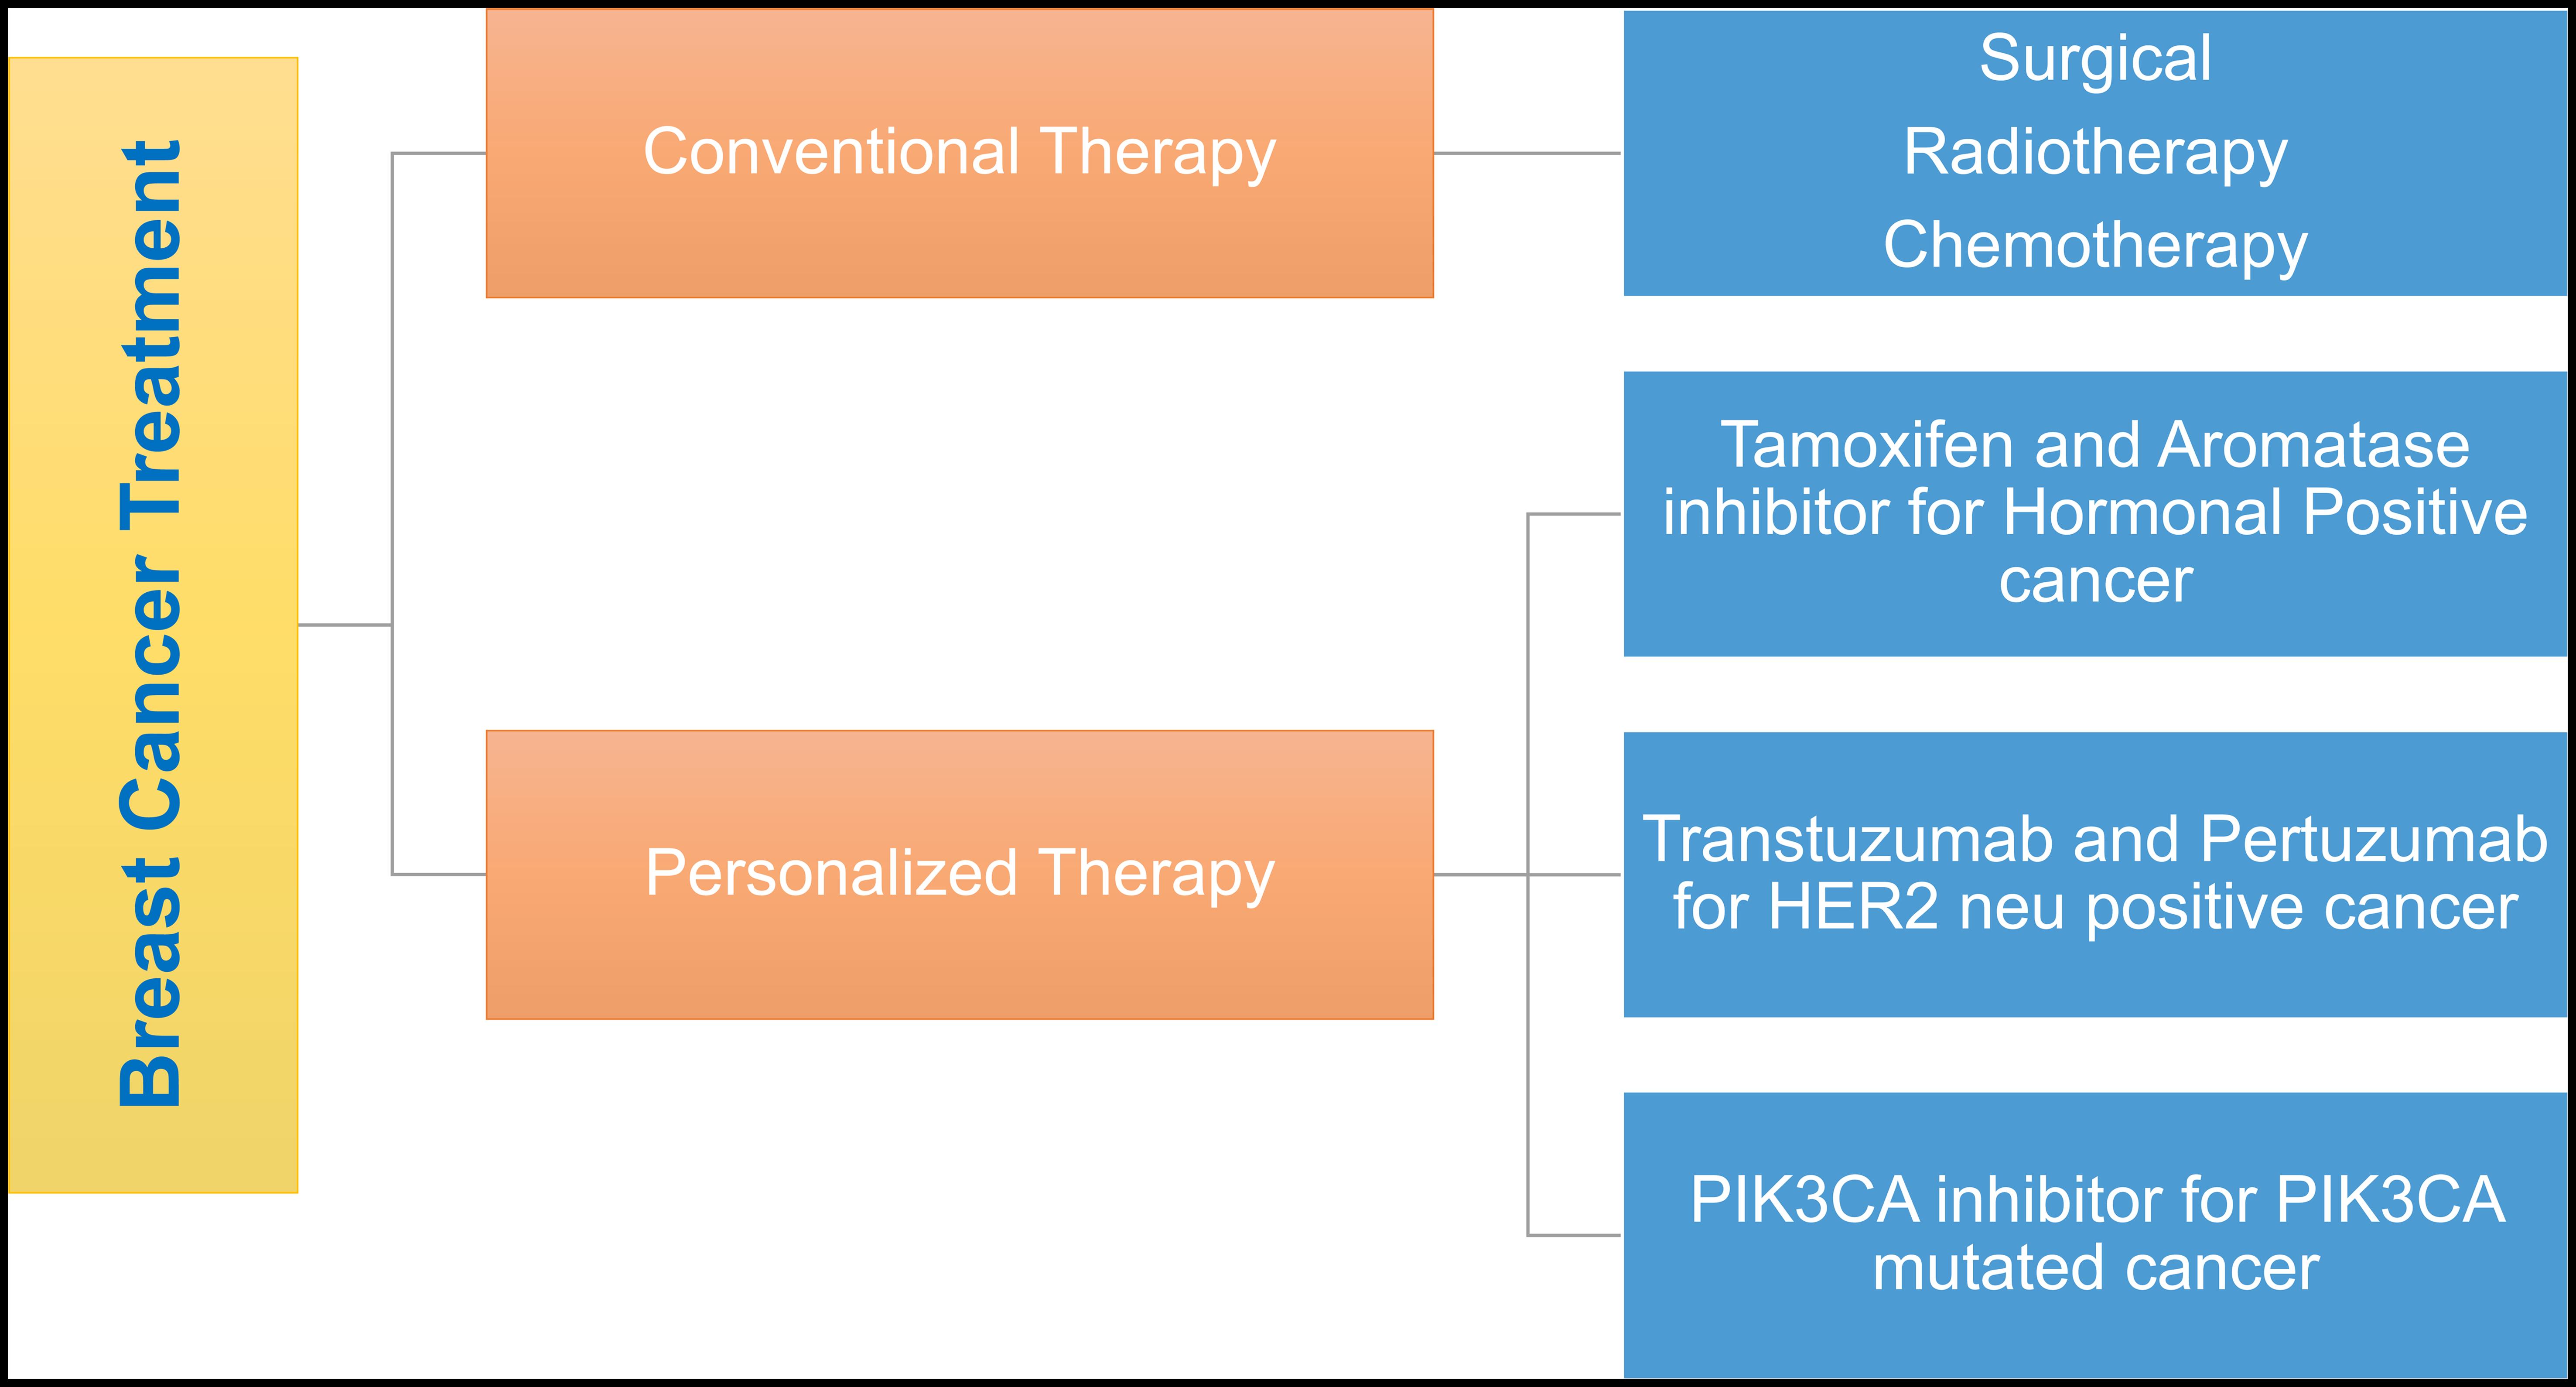 Conventional therapy and personalized therapy in Breast cancer treatment.